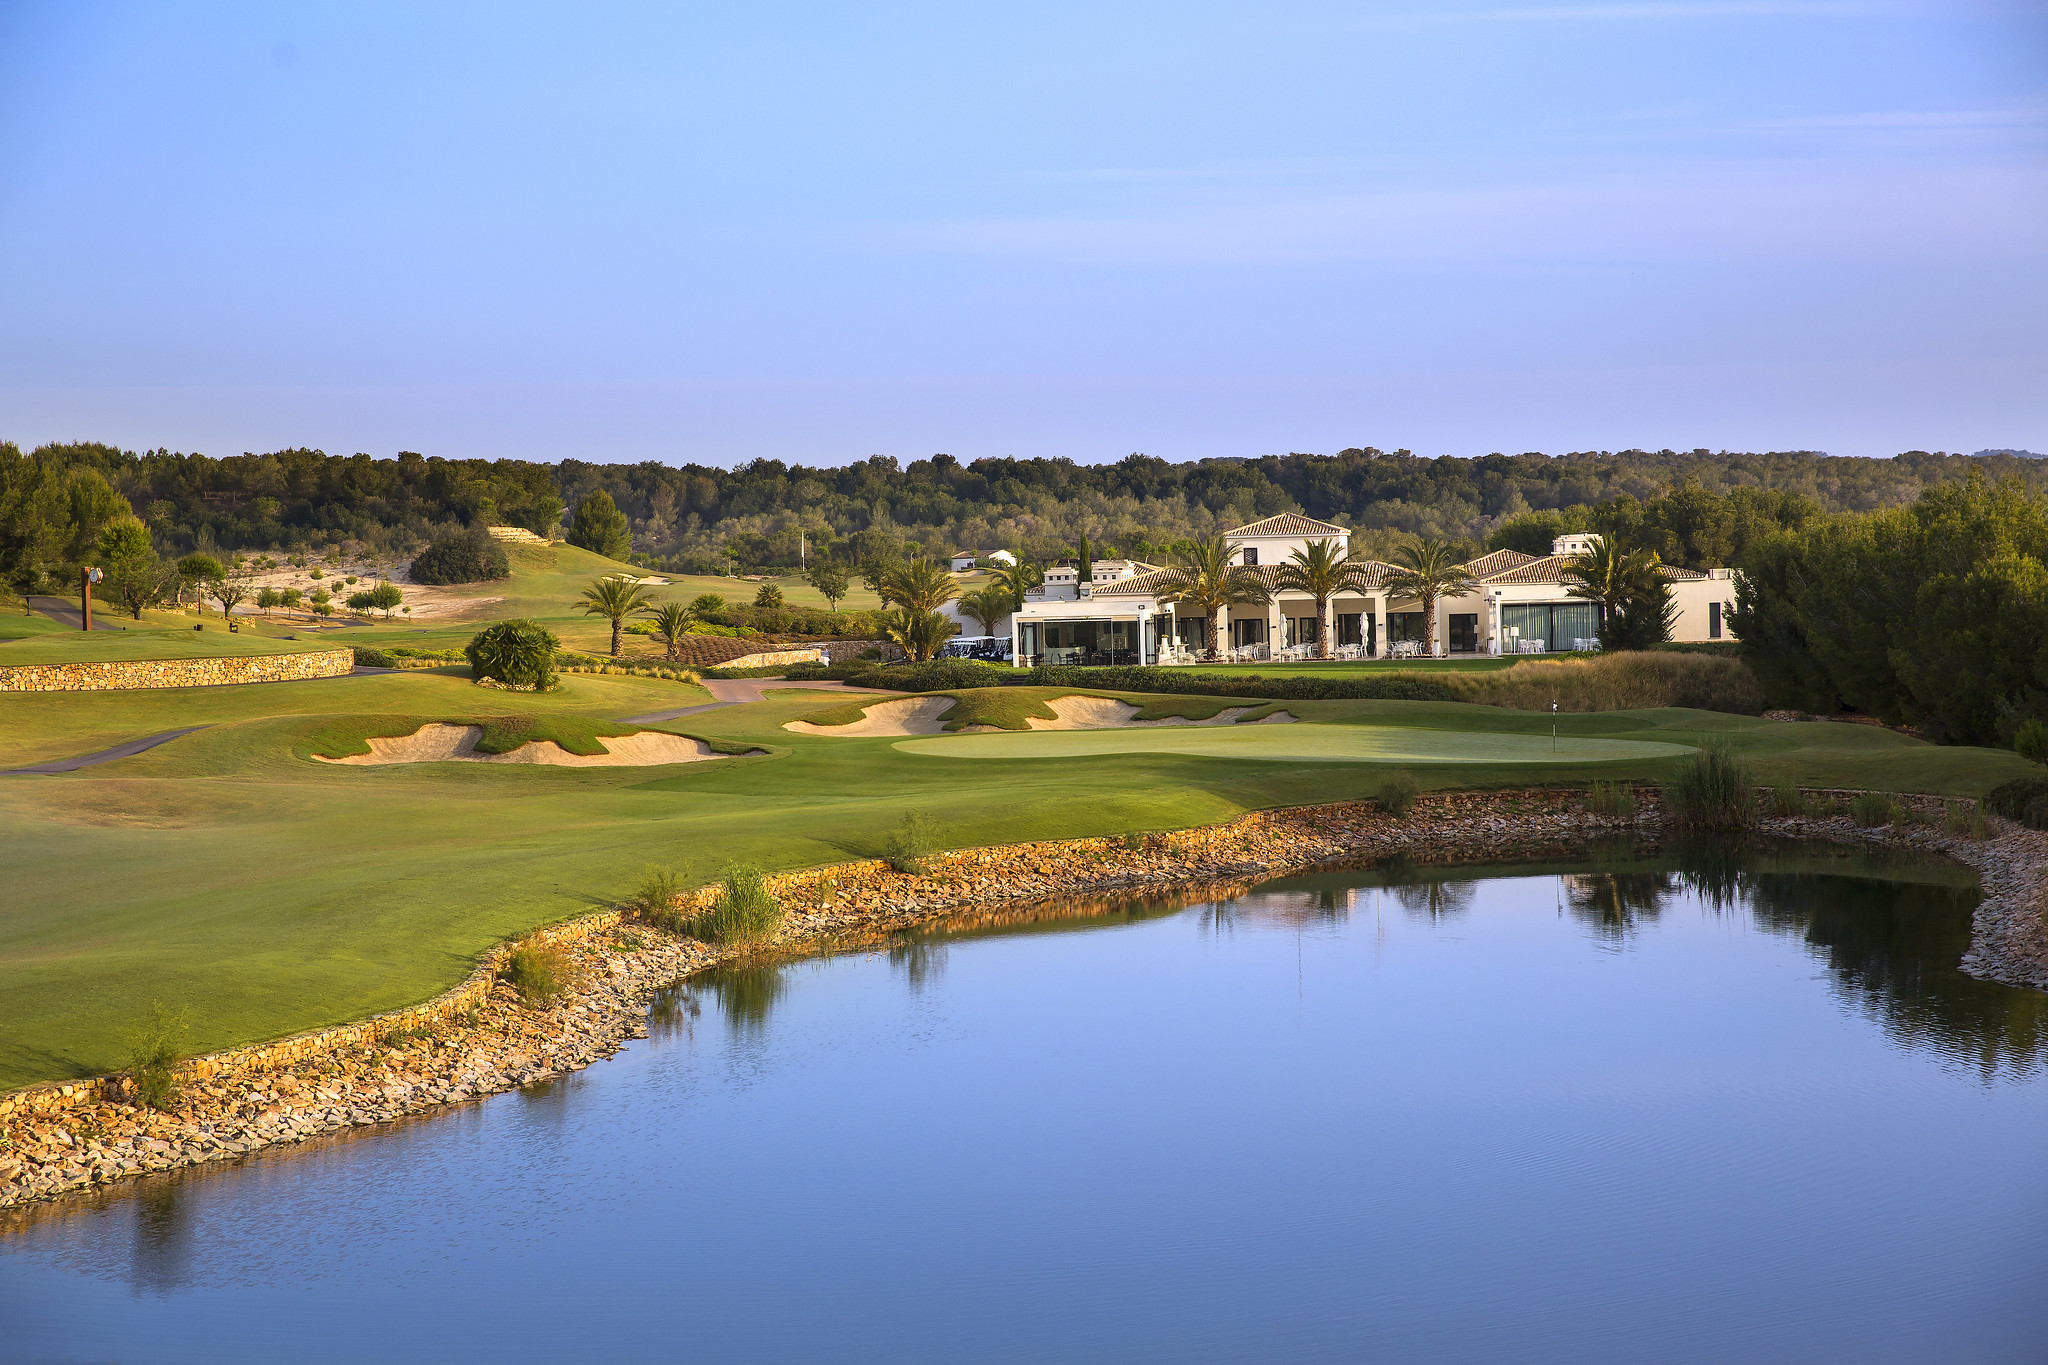 The 18th hole and clubhouse at Las Colinas